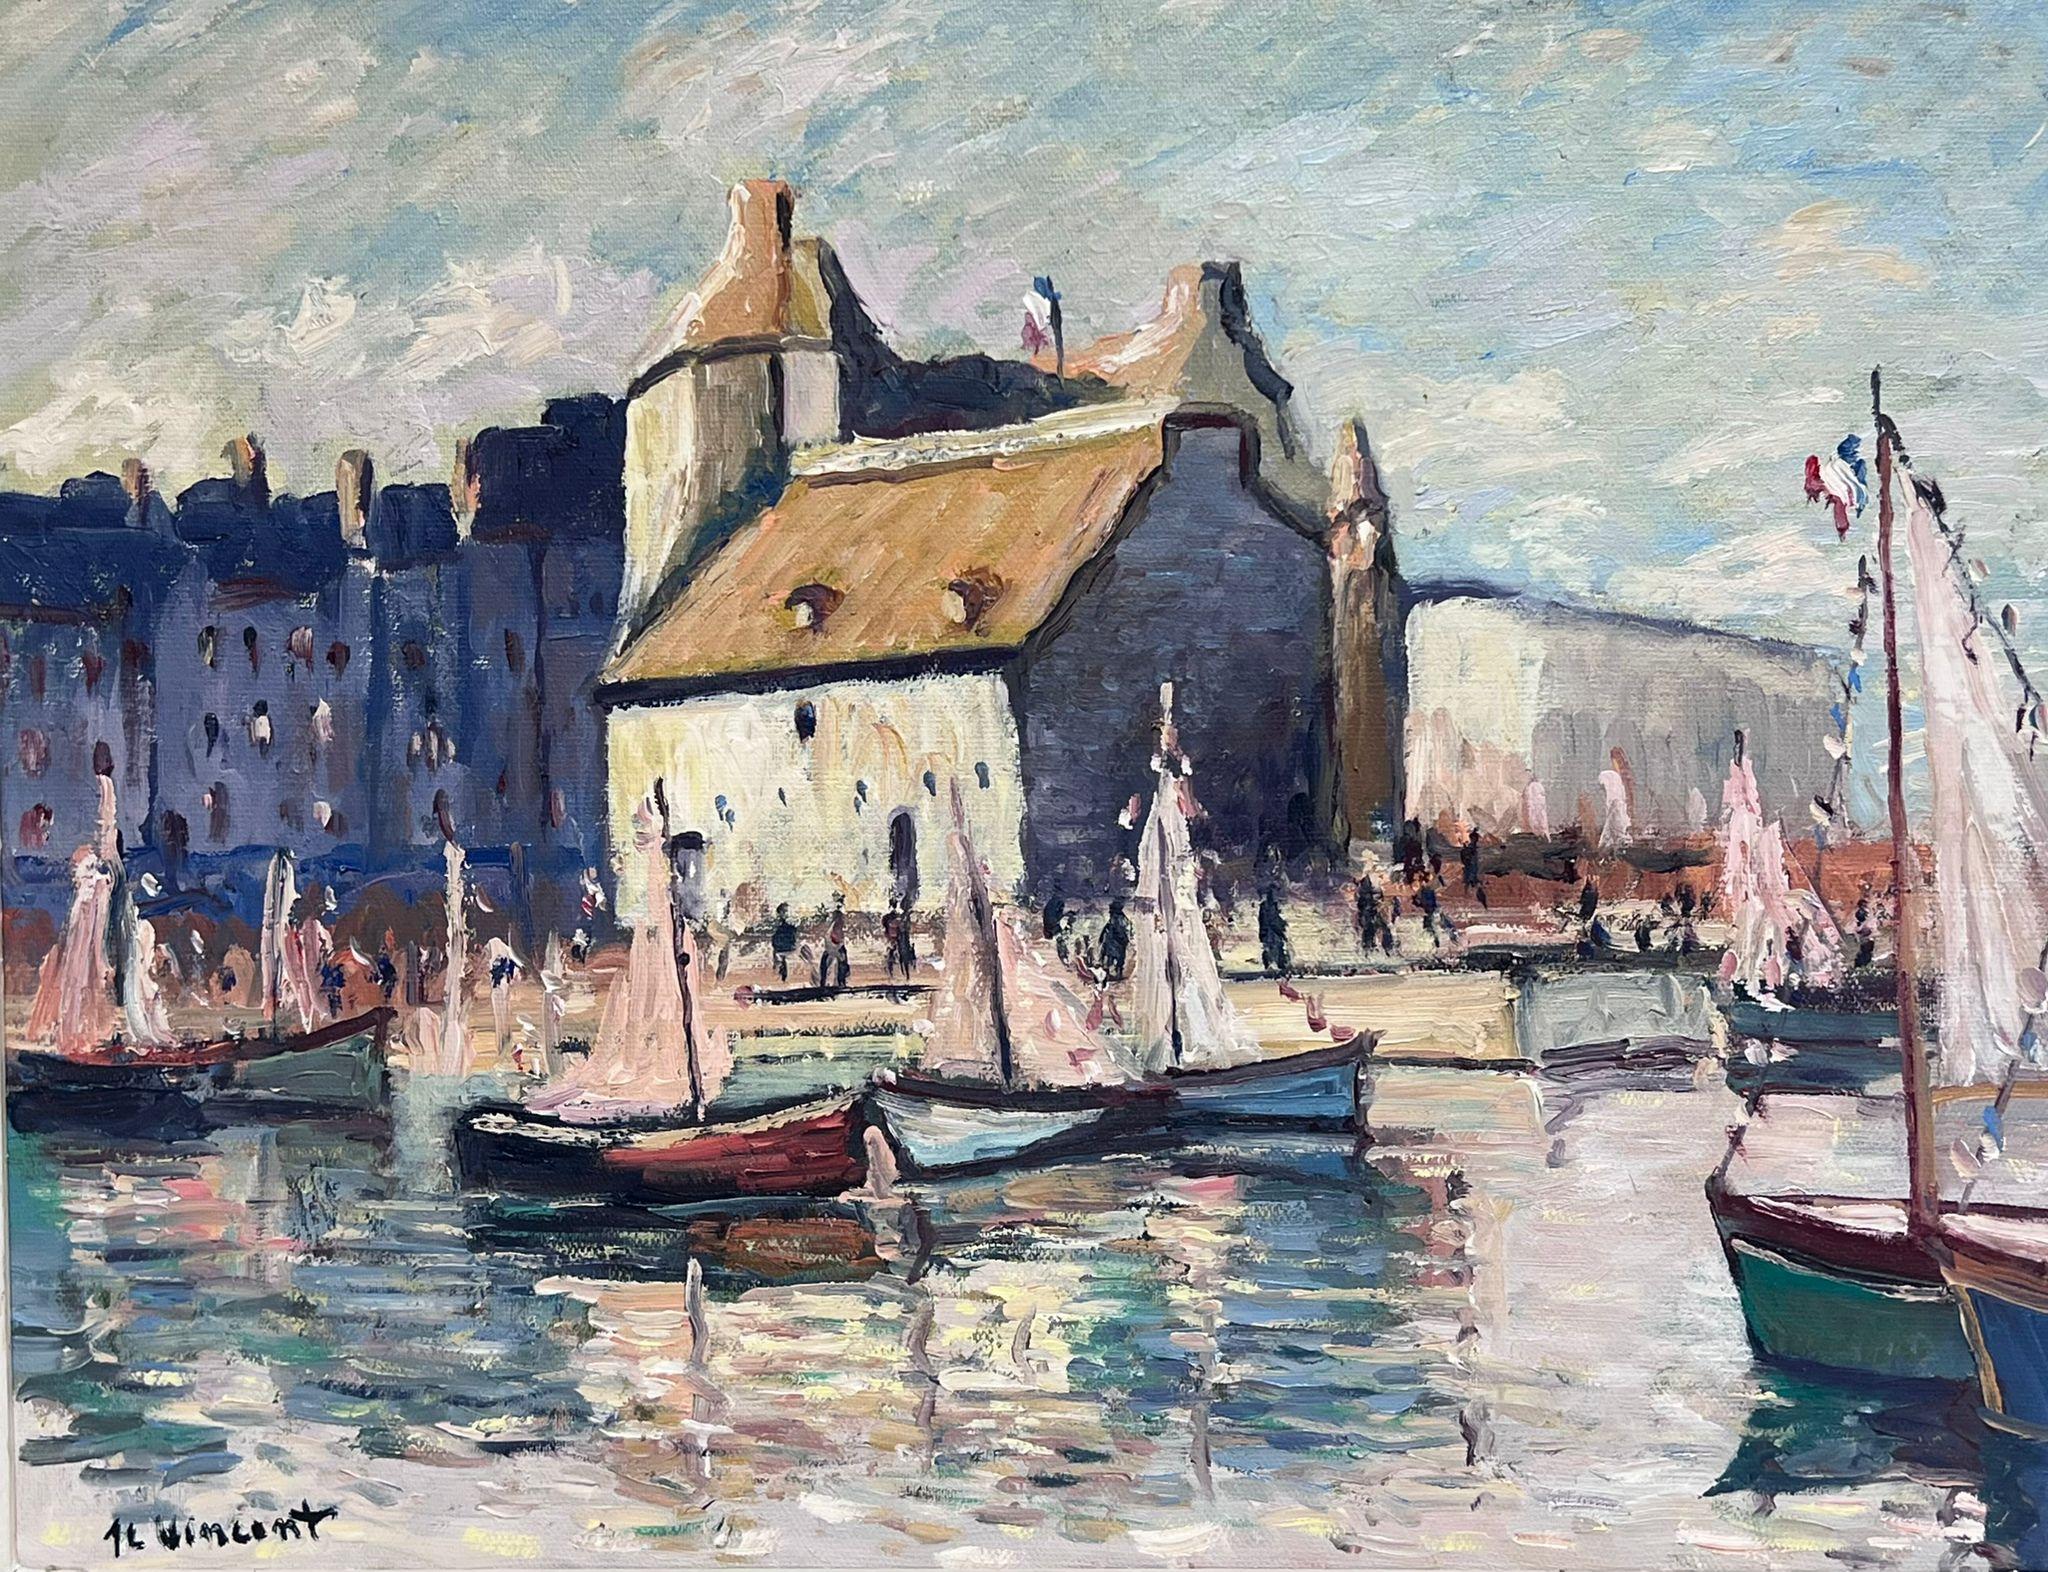 Honfleur Harbour
French School, 20th century
signed oil on canvas, framed
signed verso
framed: 20.5 x 23.5 inches
canvas: 15 x 18 inches
provenance: private collection, France
condition: very good and sound condition